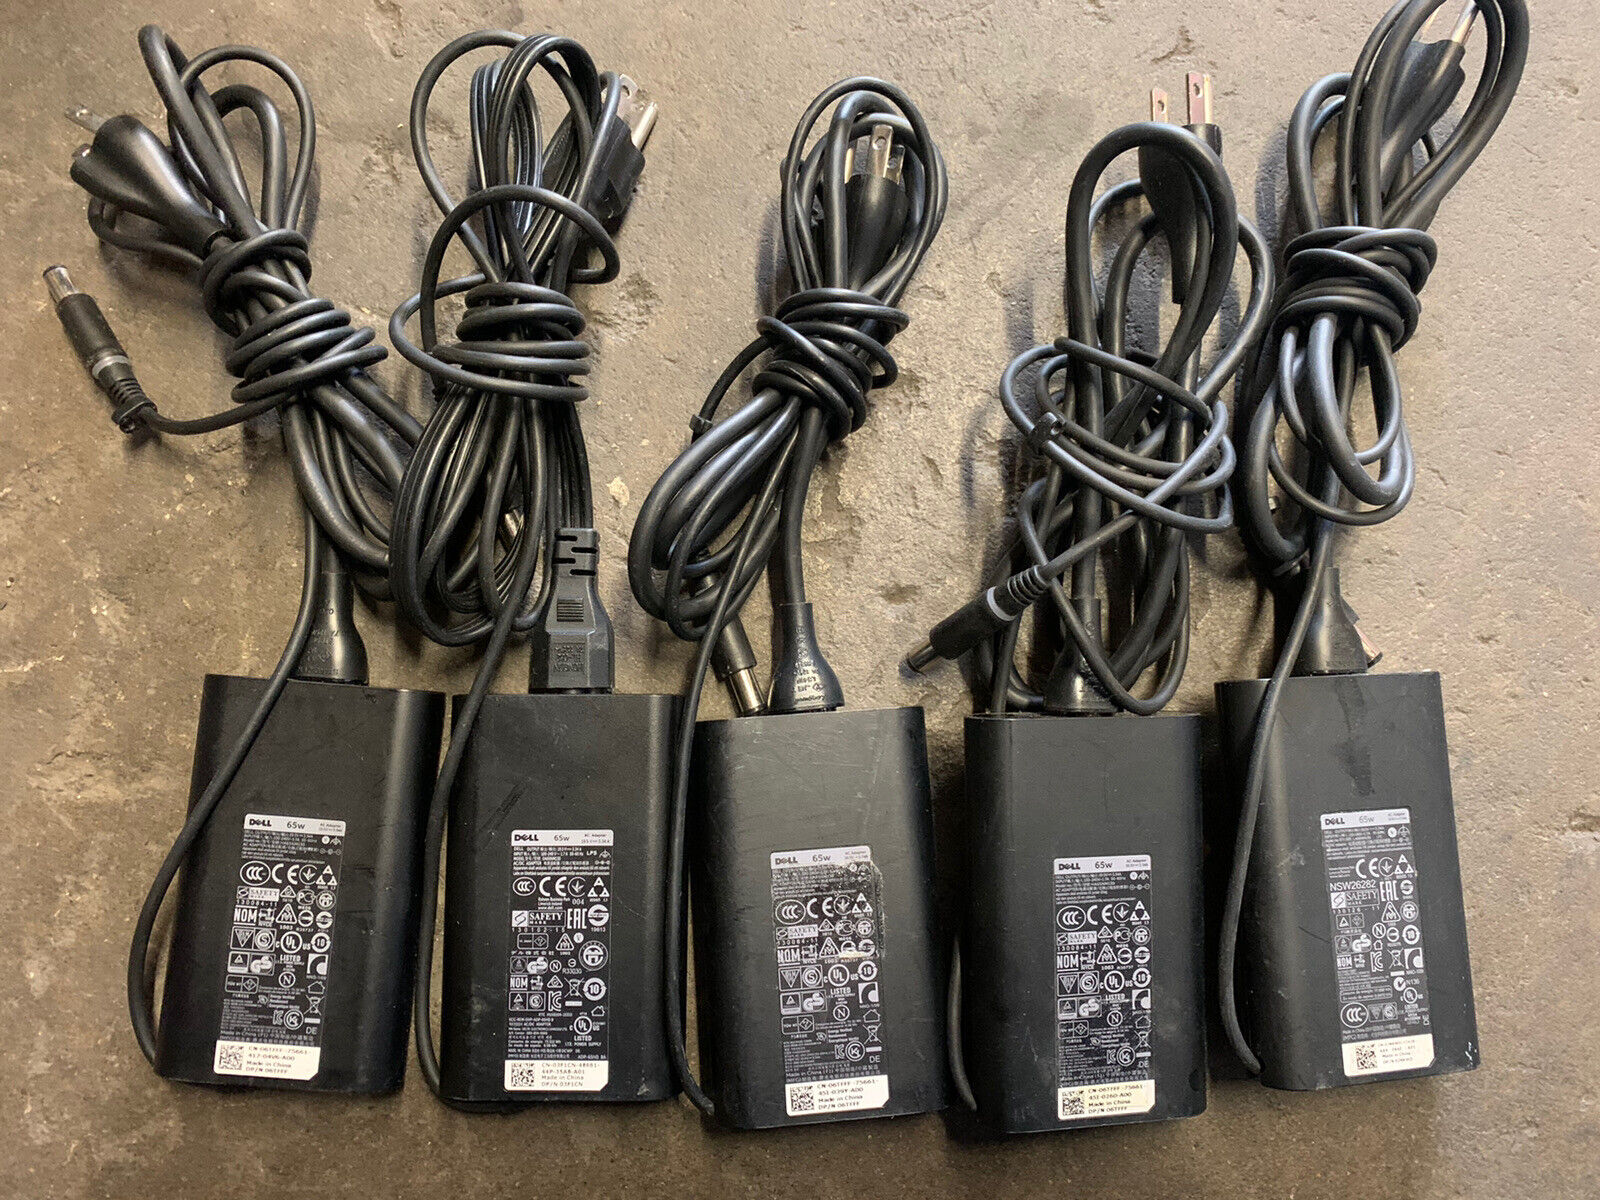 5 Lot OEM Genuine DELL 65w Laptop Charger AC Power Adapter 19.5V 3.34A HA65NM130